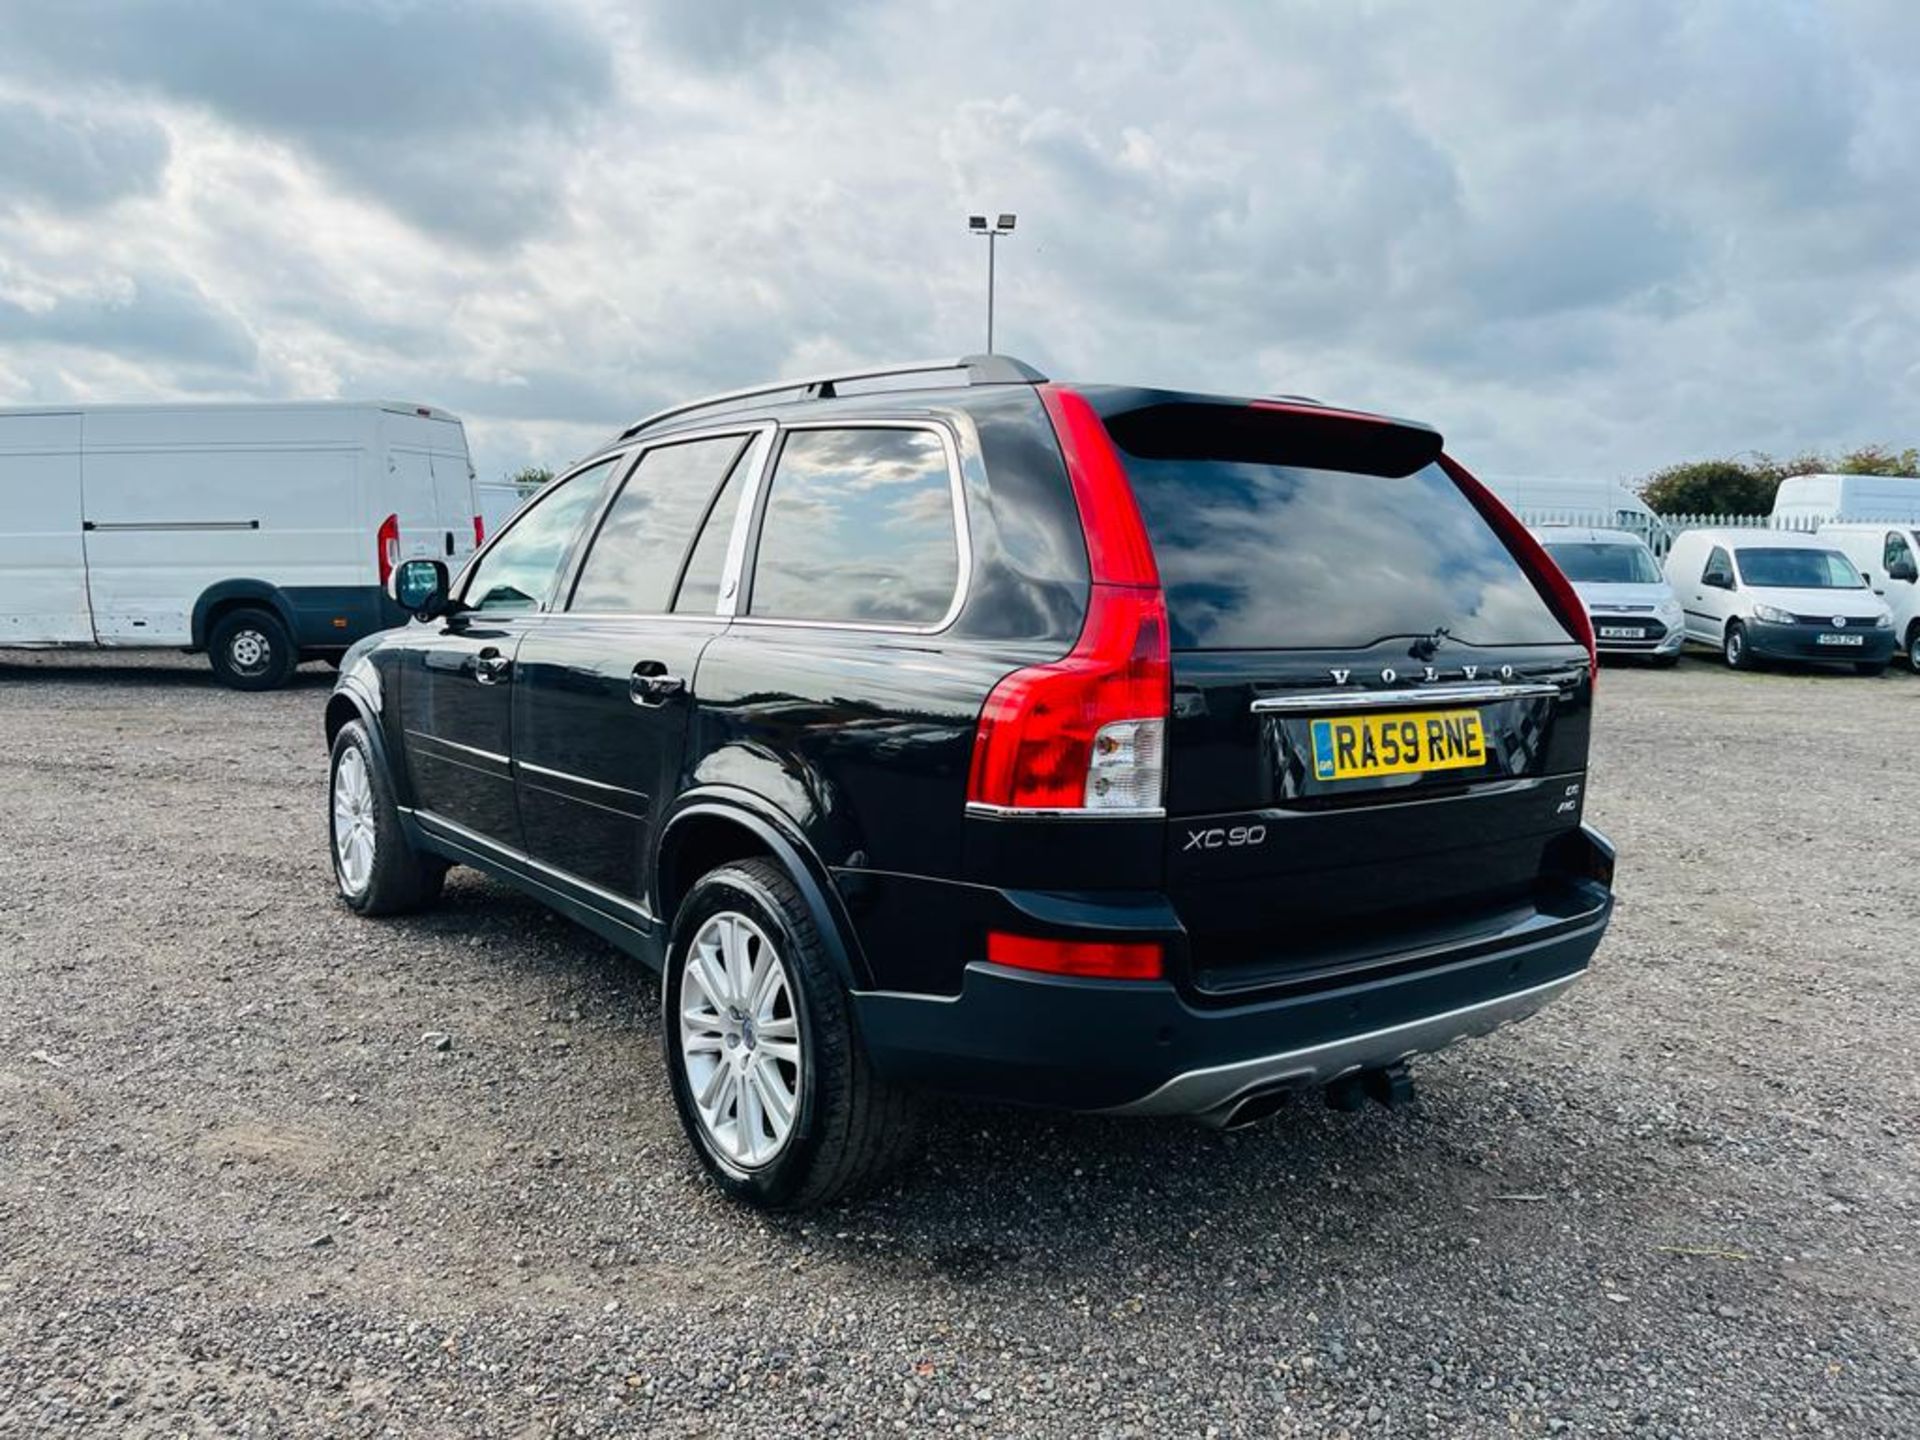 ** ON SALE ** Volvo XC90 2.4 D5 185 Executive G/T Estate 2009 '59 plate' - Climate Control - No Vat - Image 9 of 30